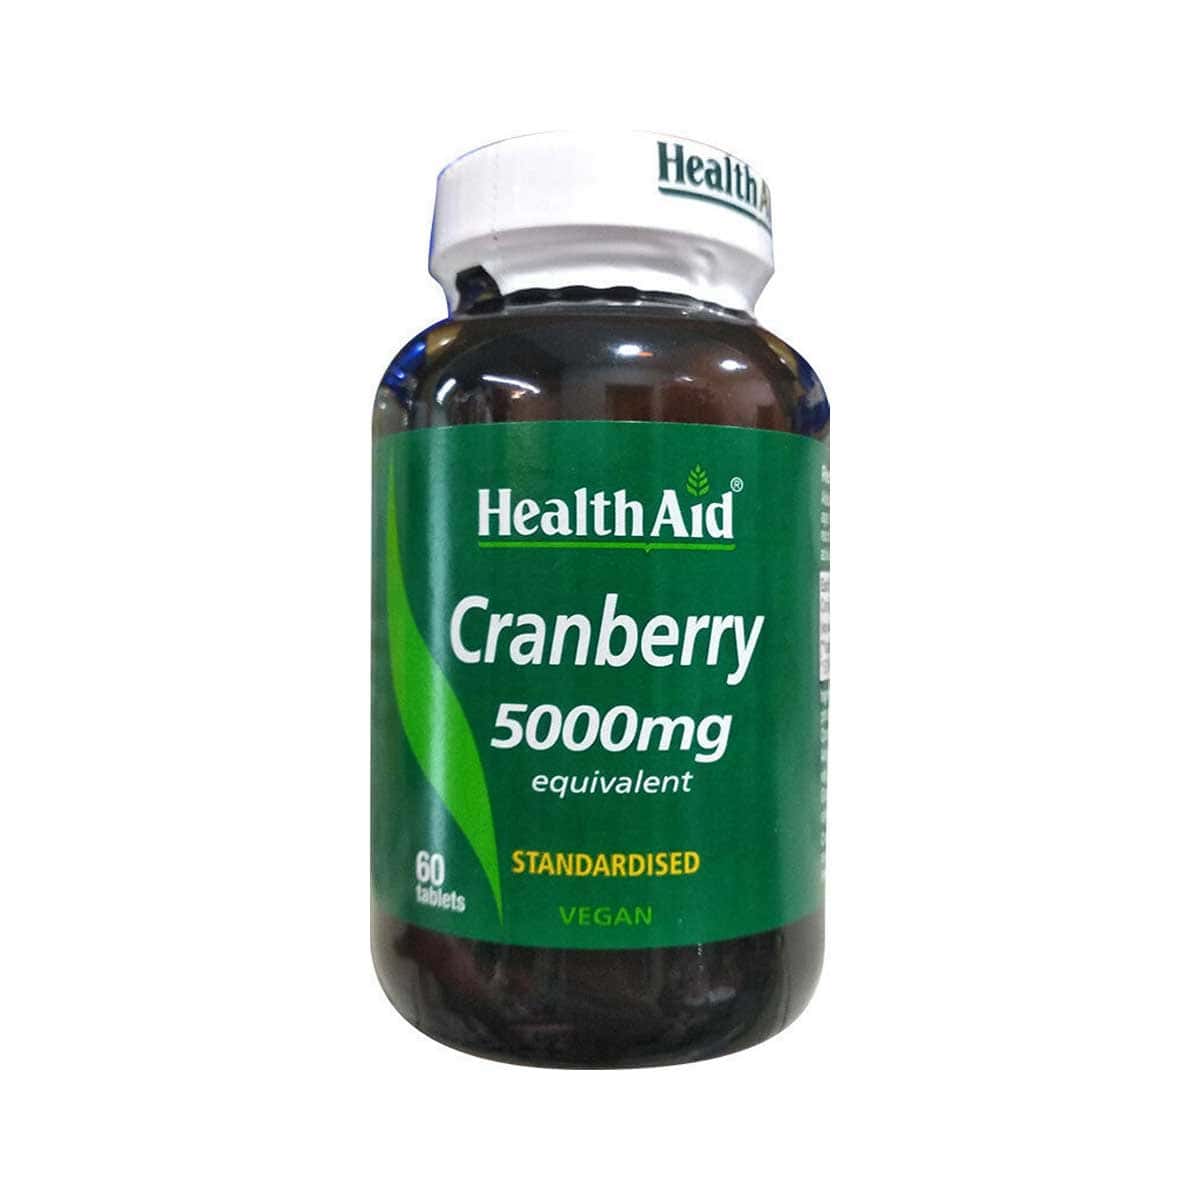 Health-Aid-Cranberry-Extract-5000-mg-60-tampletes-5019781025749